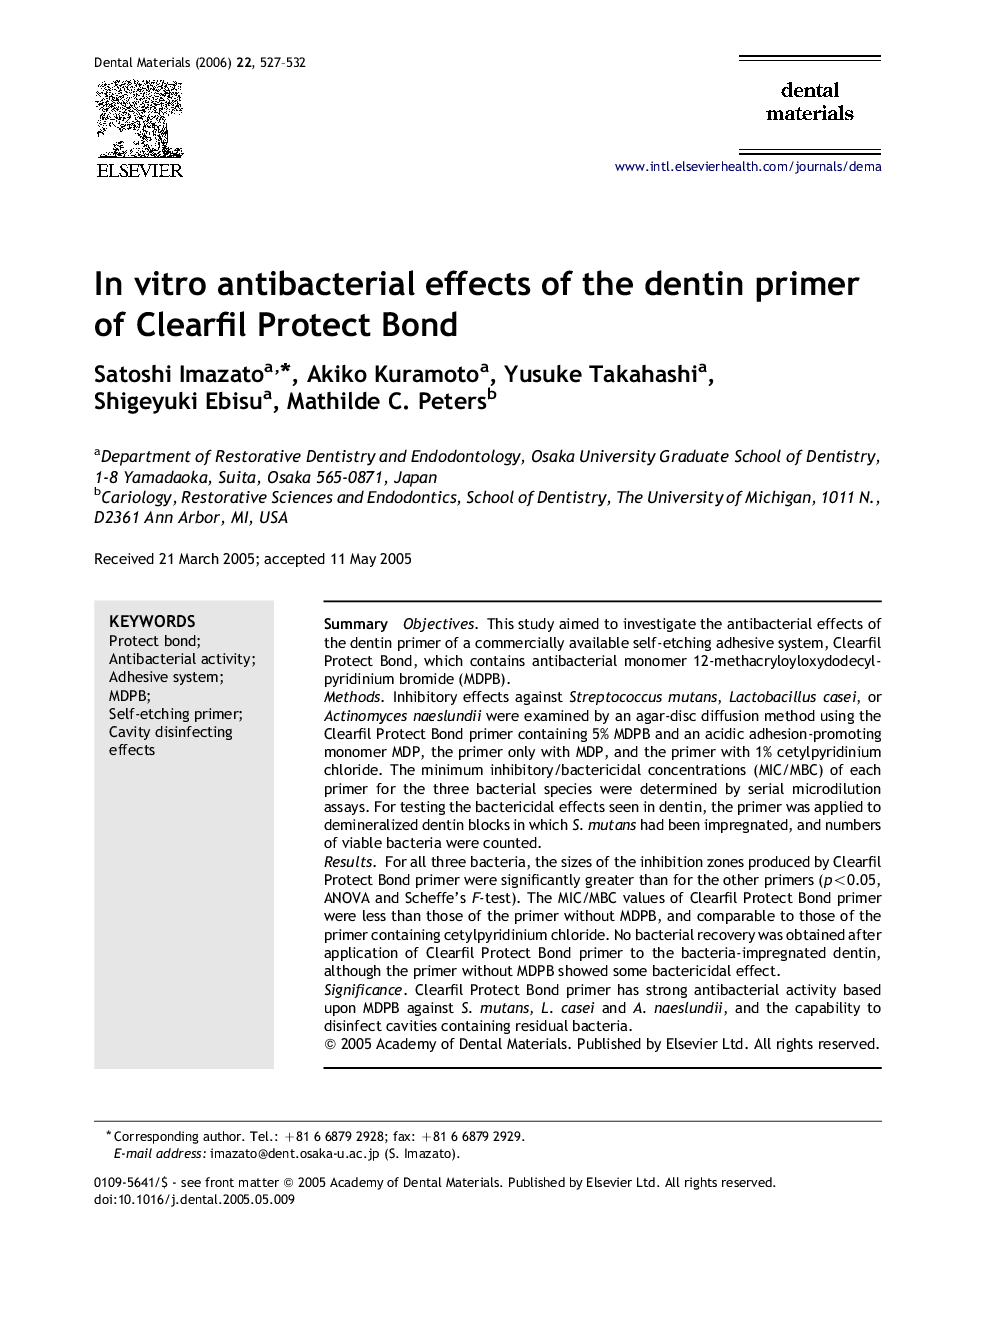 In vitro antibacterial effects of the dentin primer of Clearfil Protect Bond